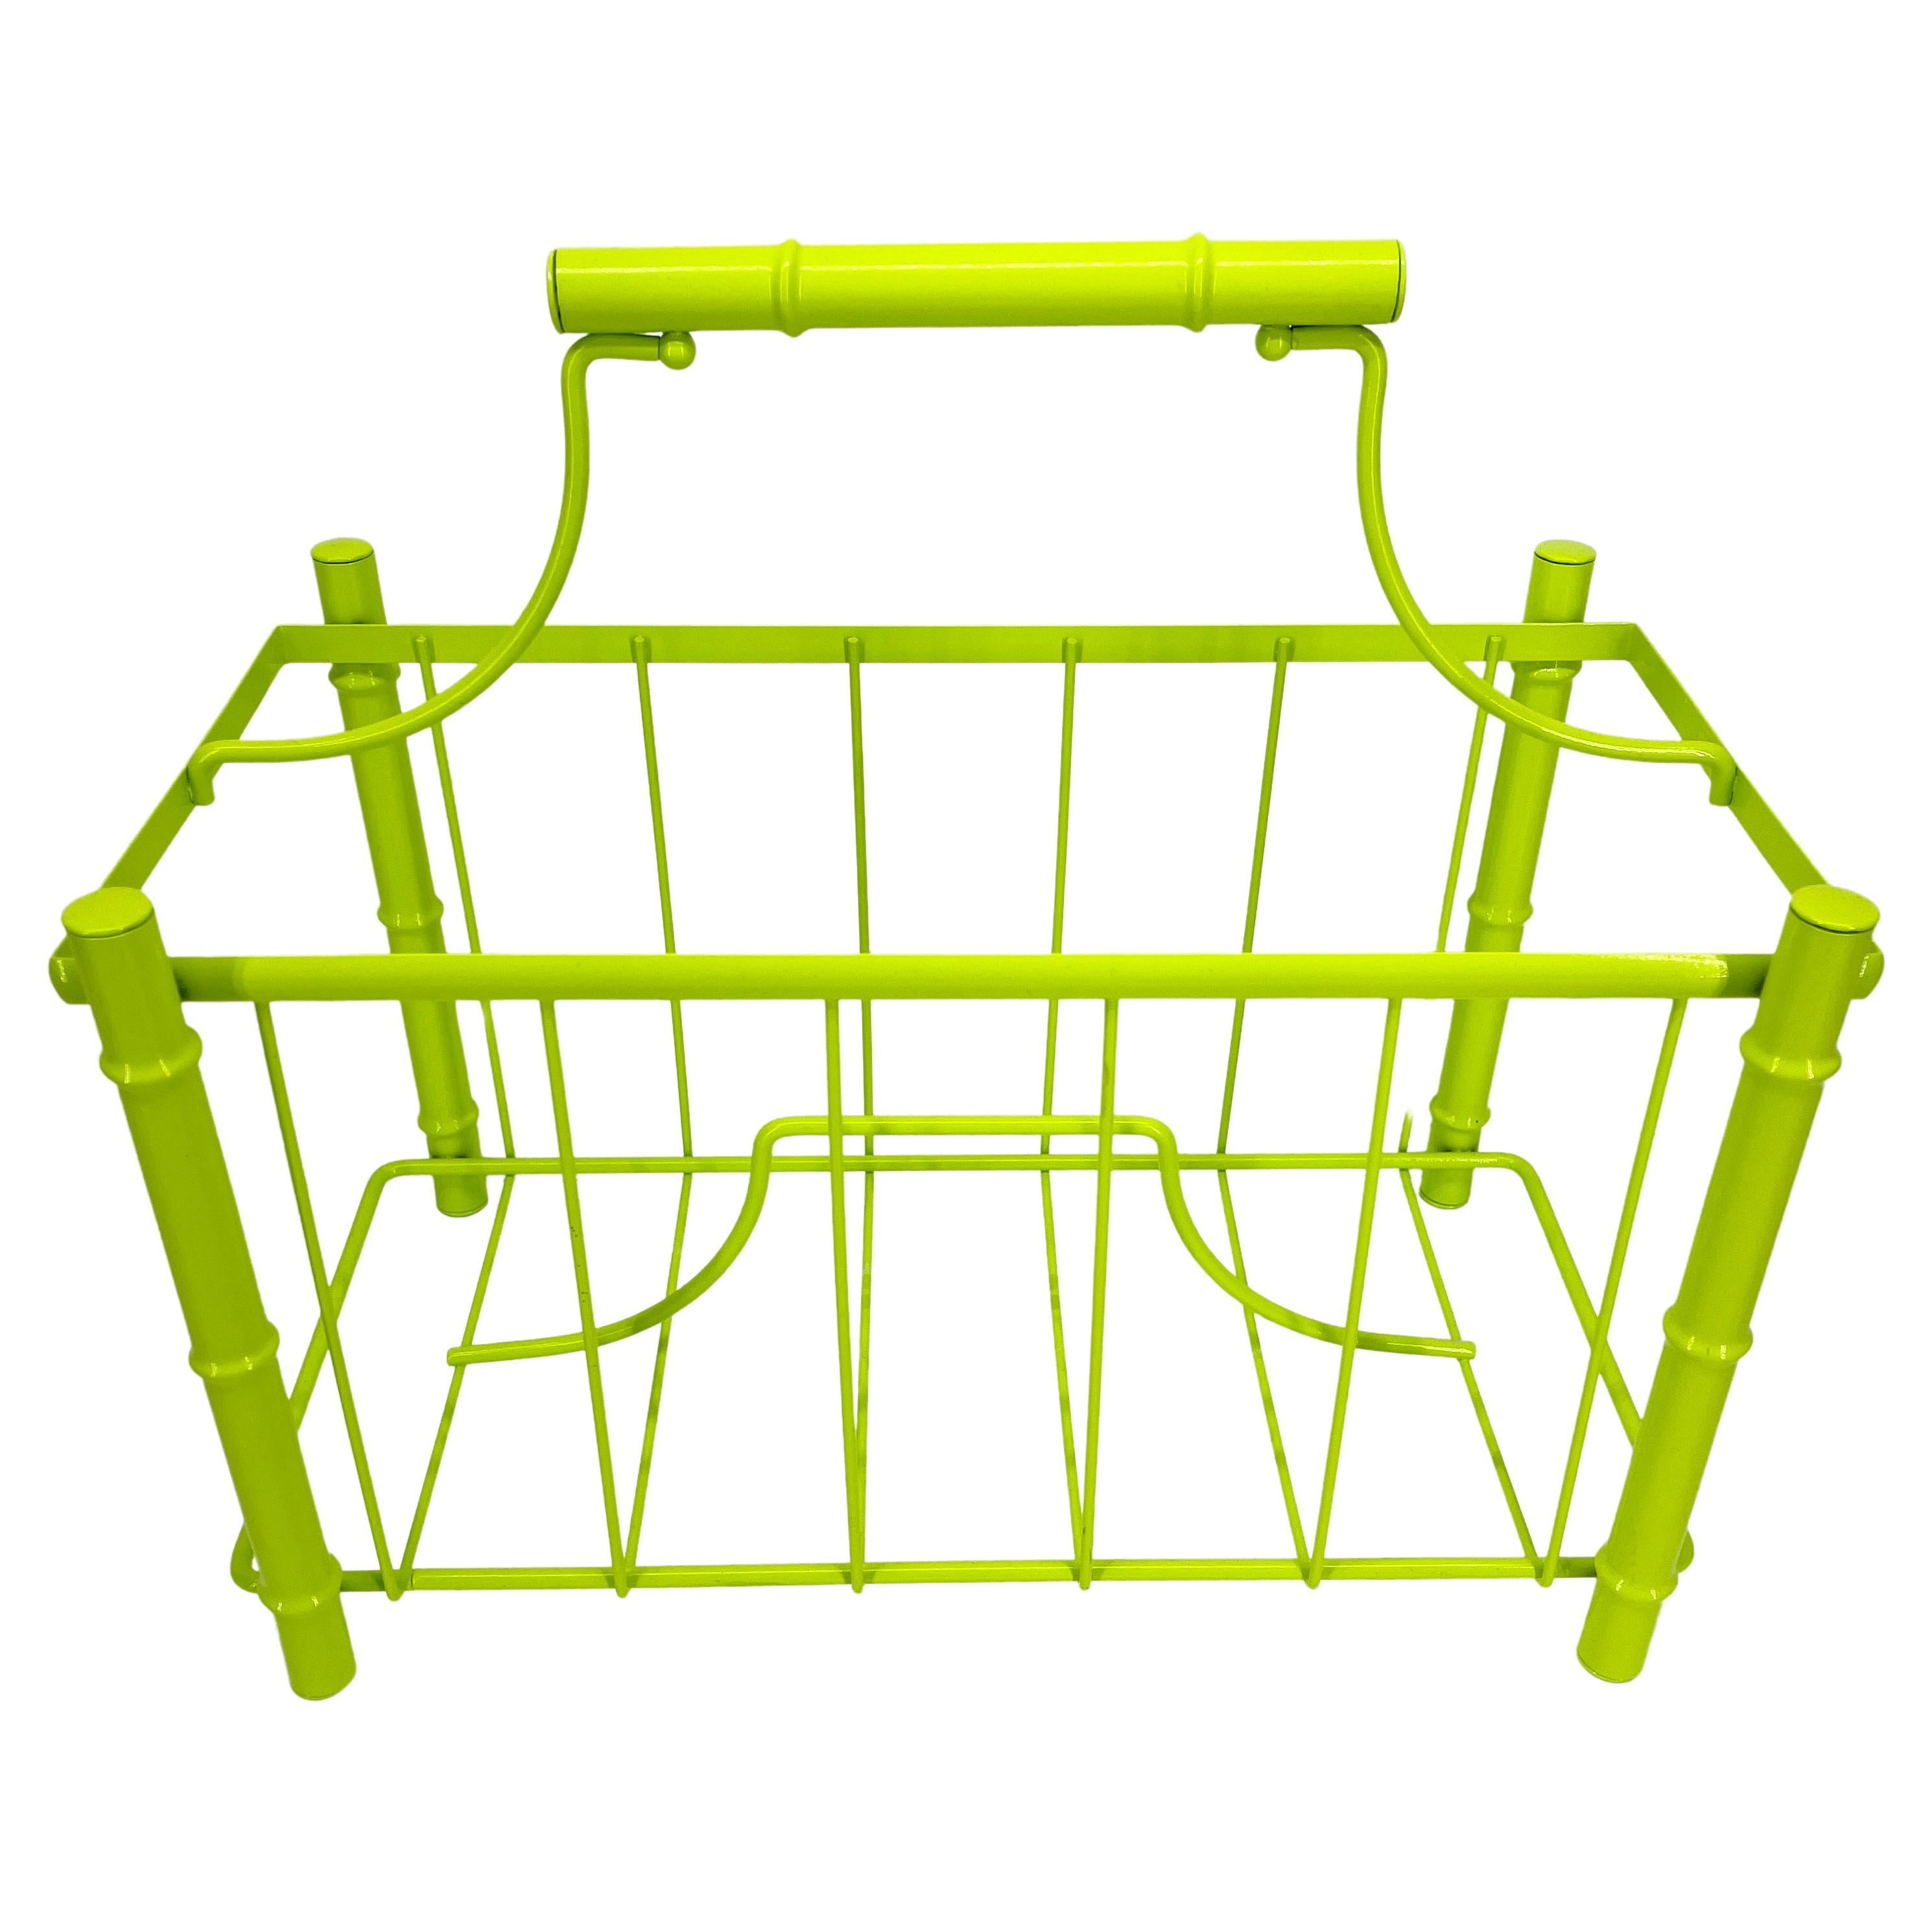 Mid-Century Modern Faux Bamboo Magazine Rack
Powder Coated Bright Chartreuse.